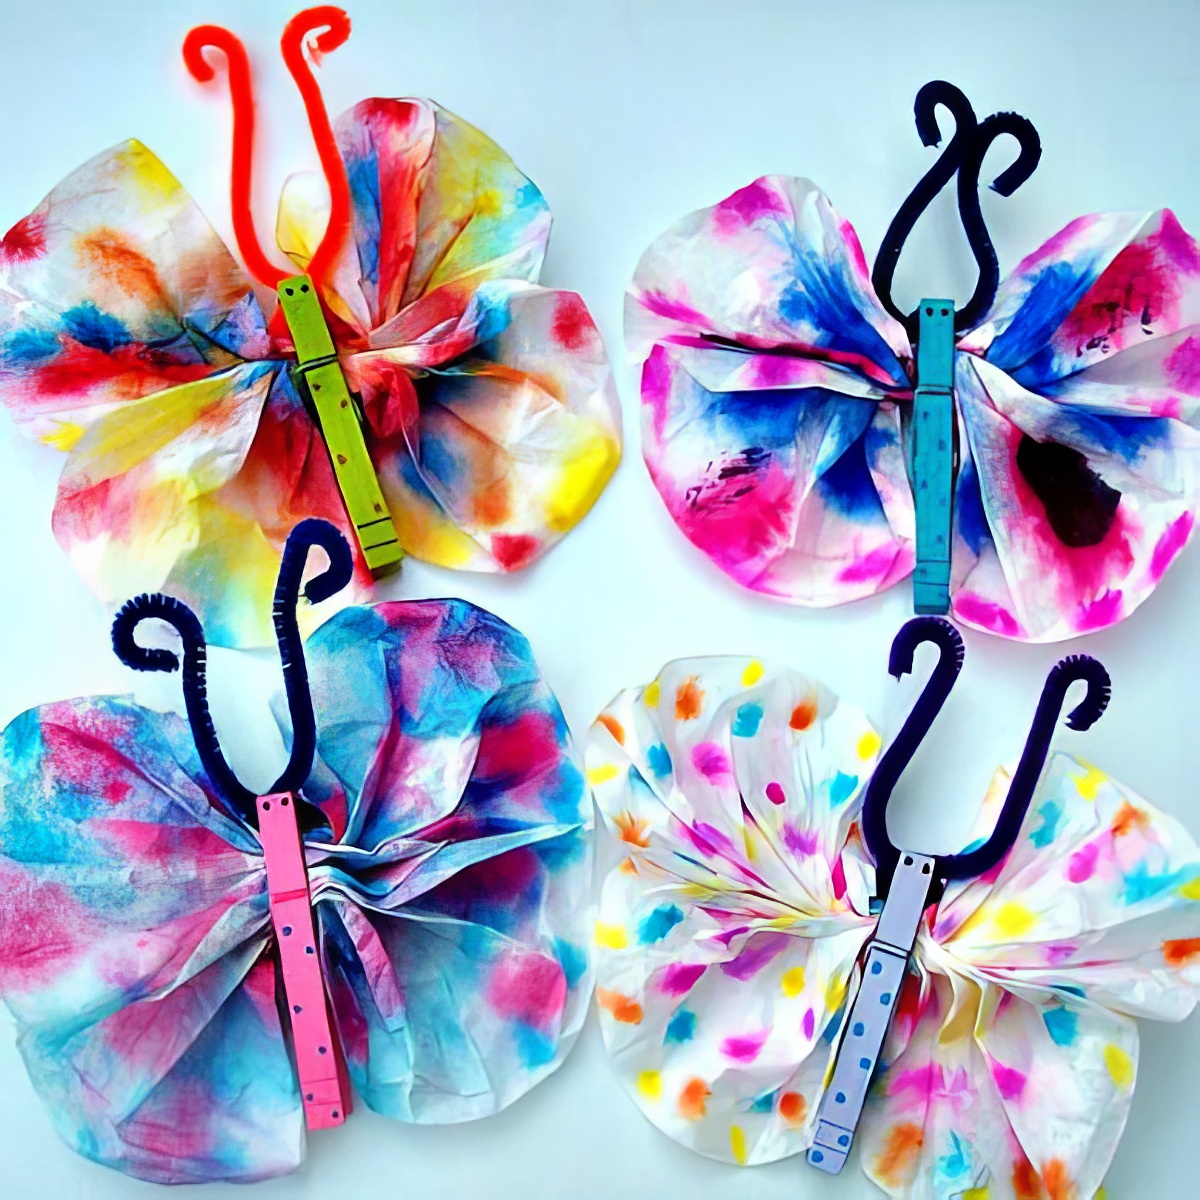 tye dye butterflies with pipe cleaners and colorful papers